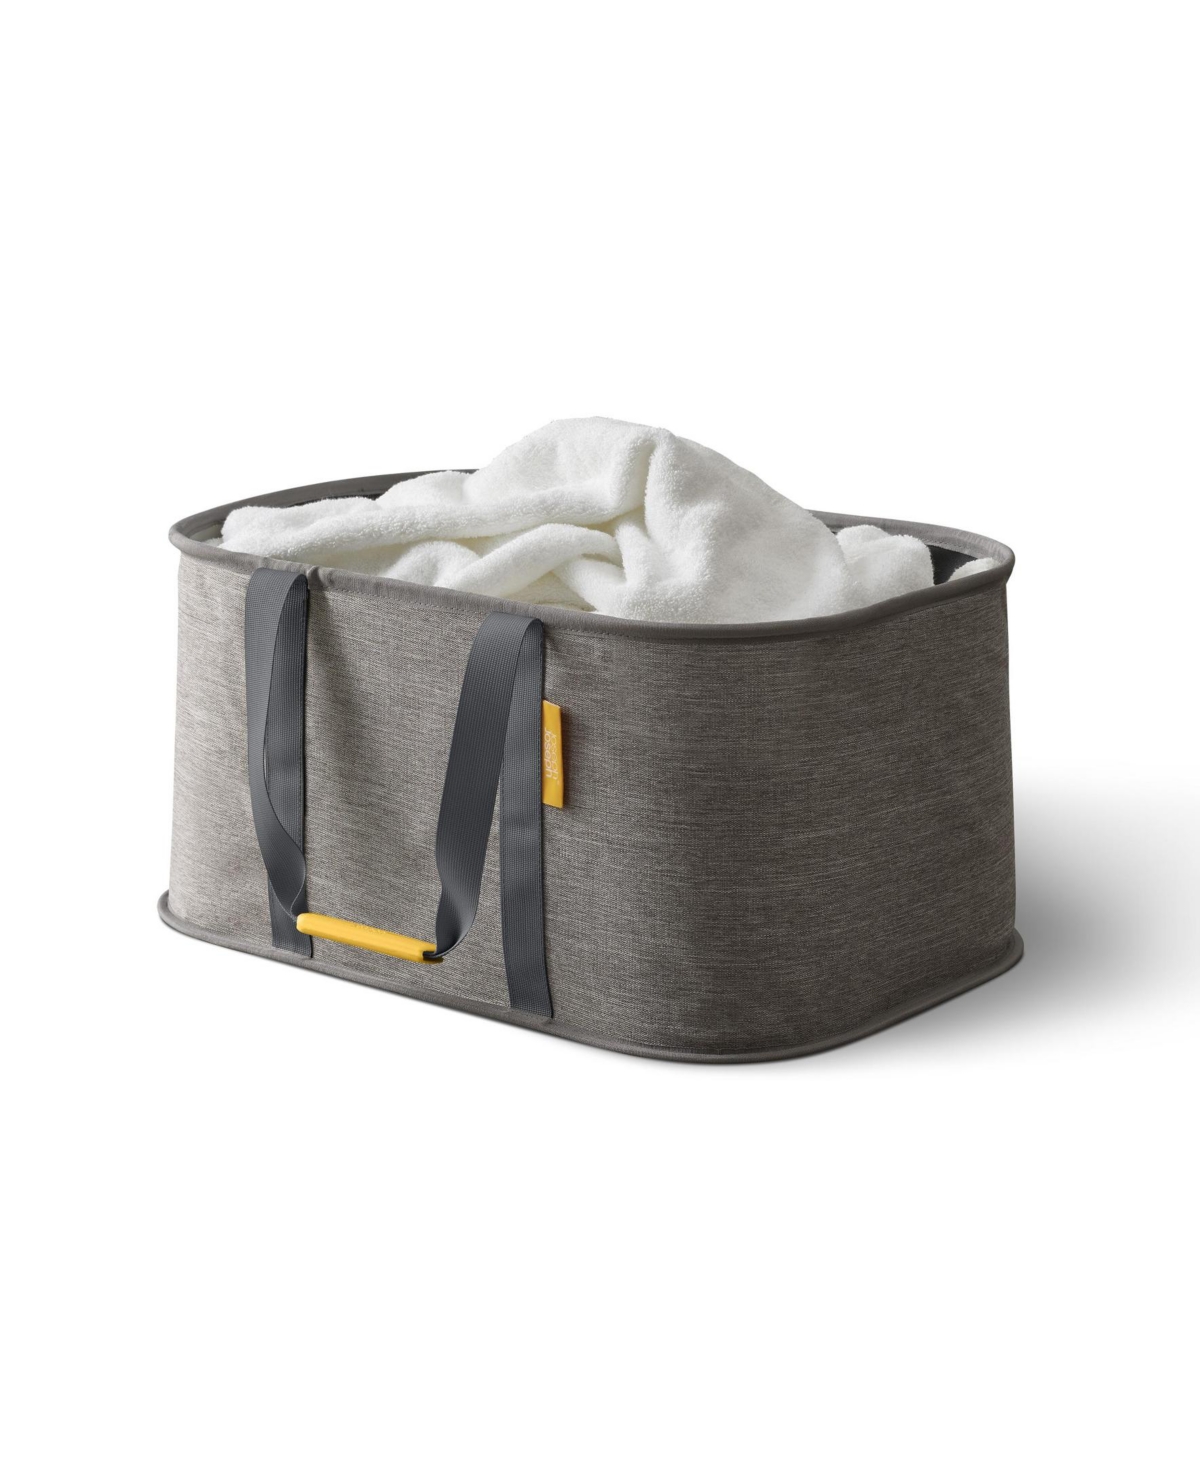 Hold-All Collapsible 35L Laundry Basket - Gray